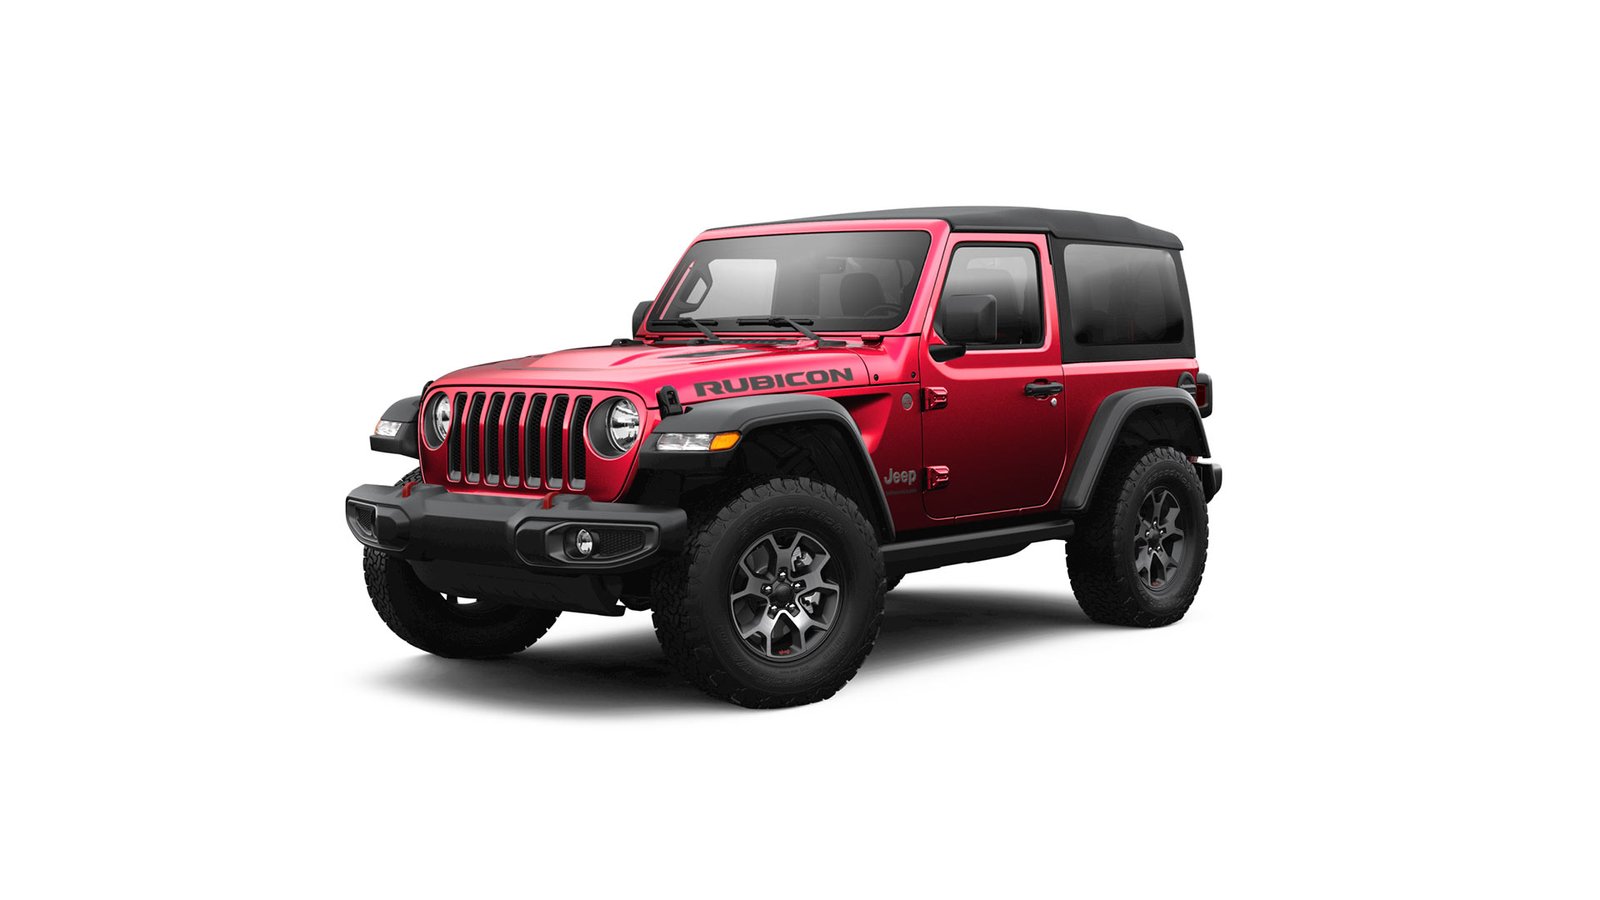 2022 Jeep Wrangler Rubicon 4X4 - All Color Options - Images - AUTOBICS